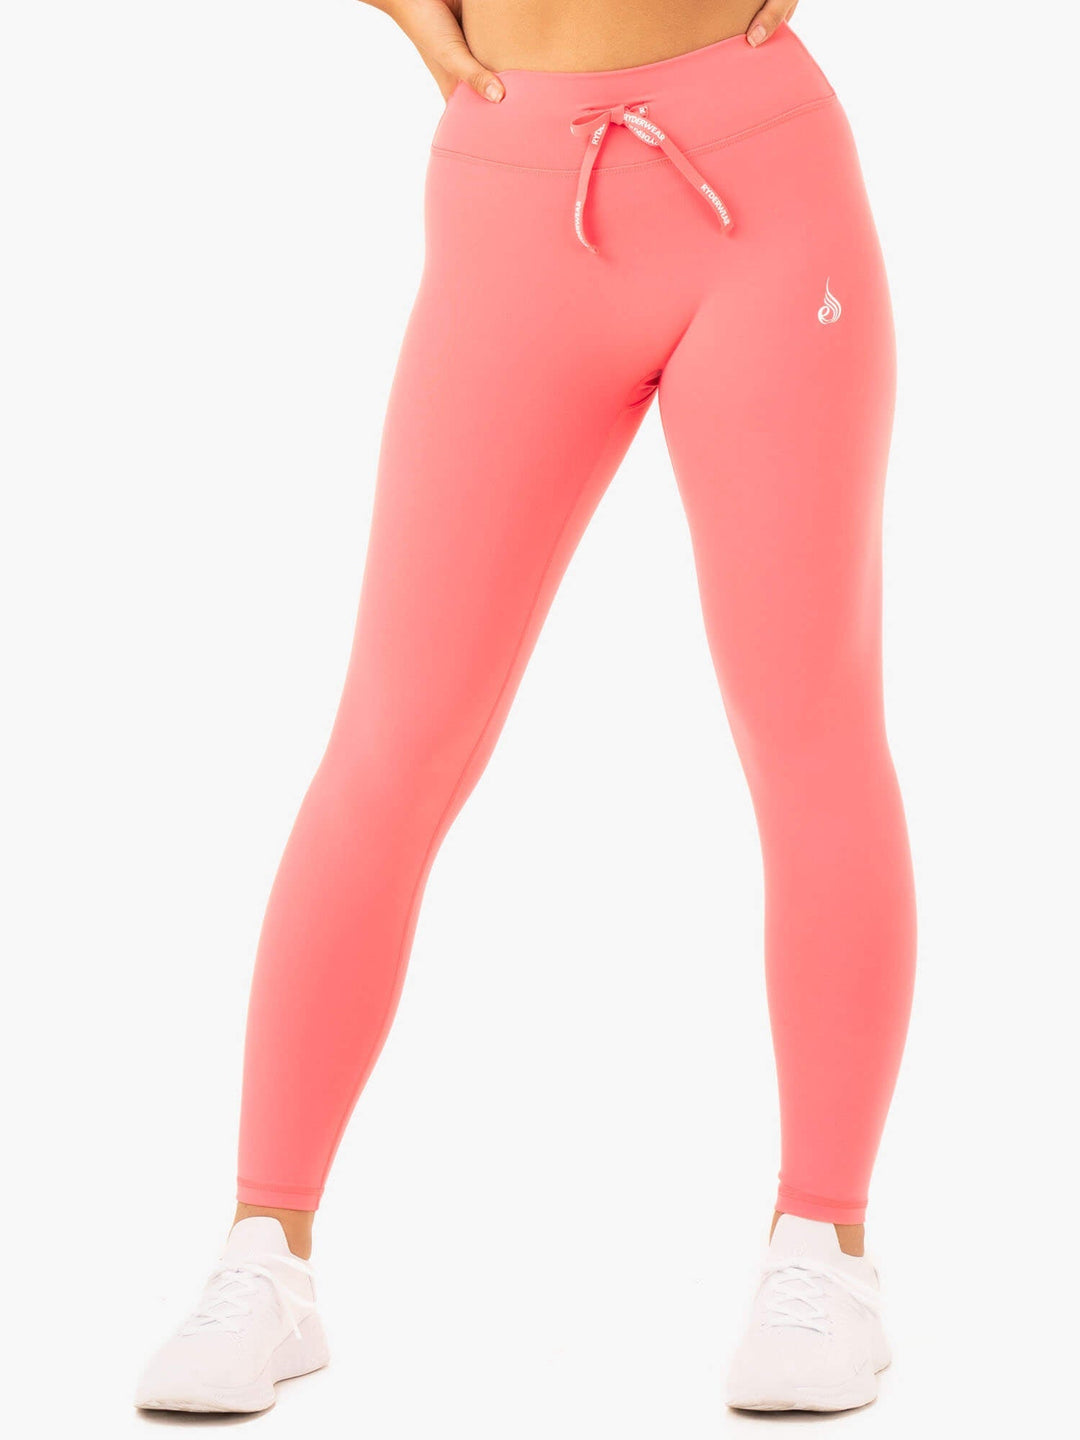 Replay High Waisted Leggings - Coral Clothing Ryderwear 